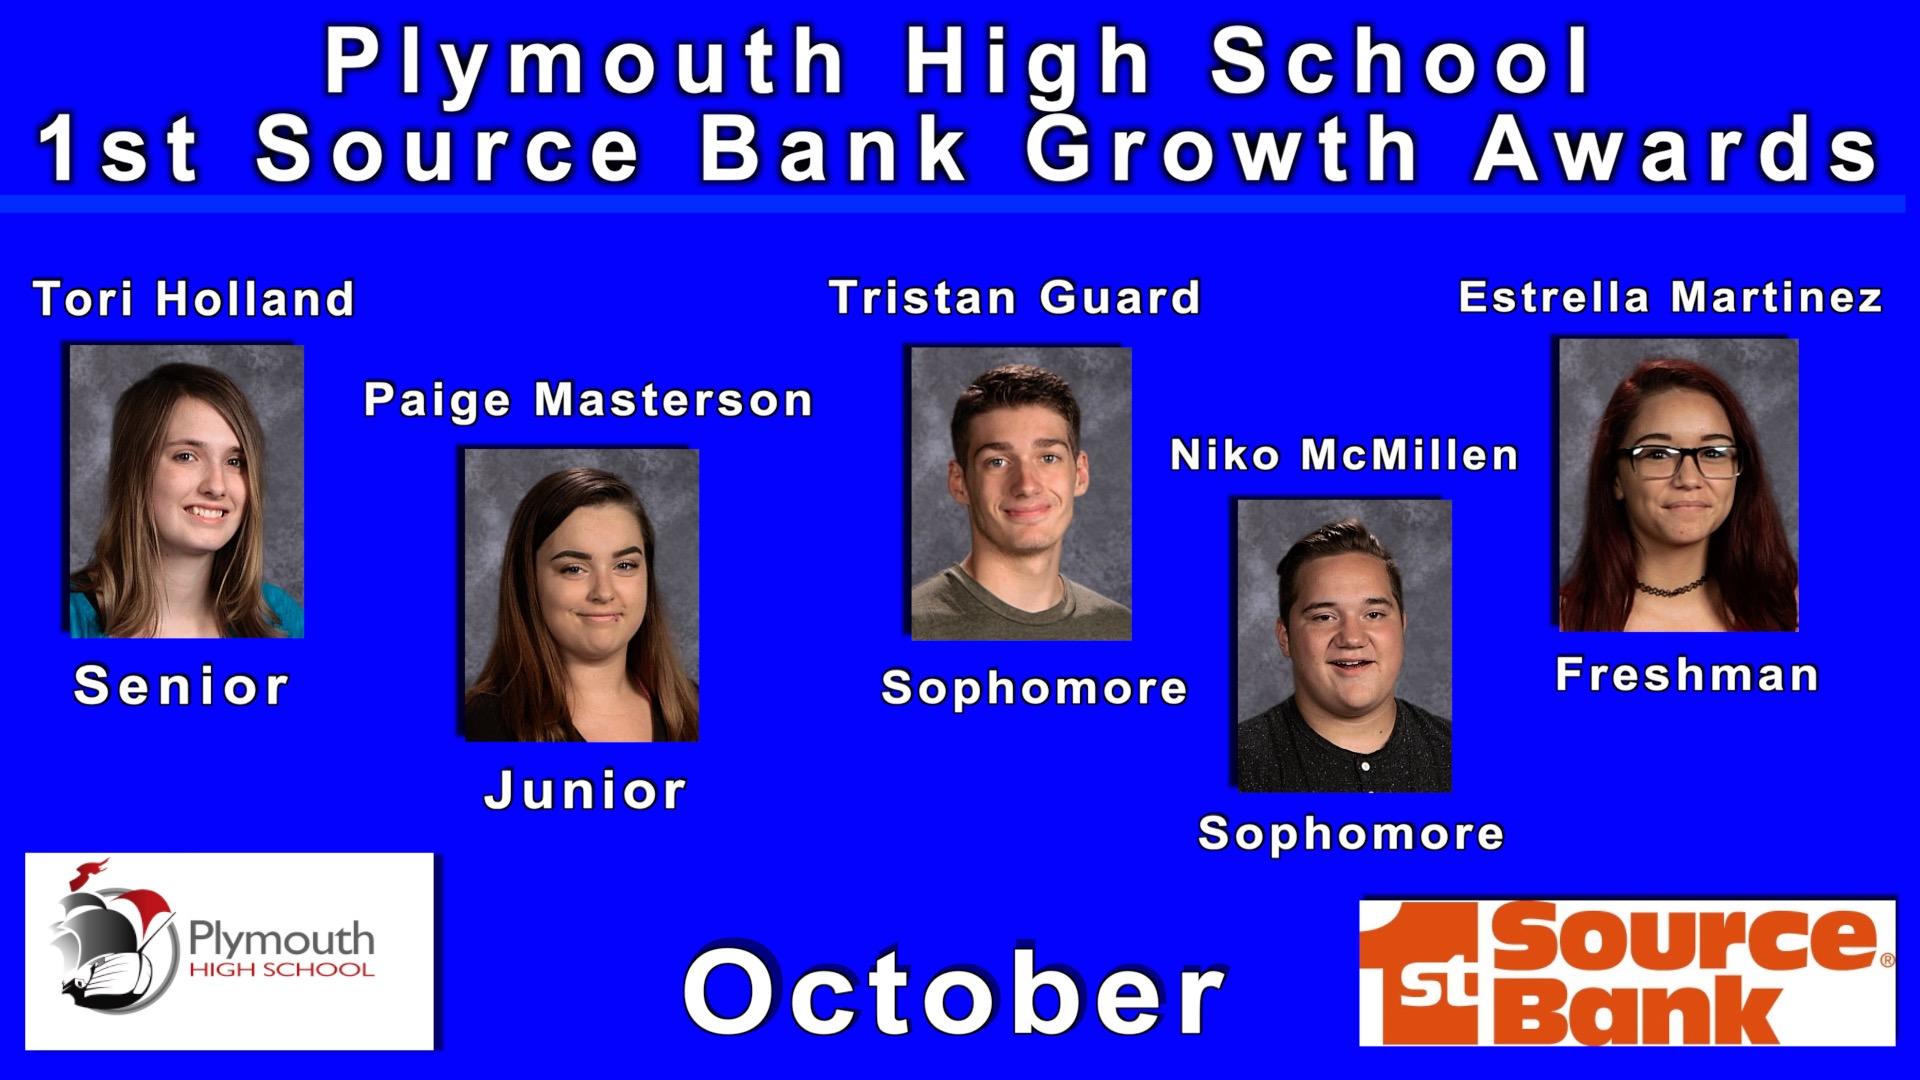 Congratulations to the October Plymouth High School 1st Source Bank Growth award recipients! 